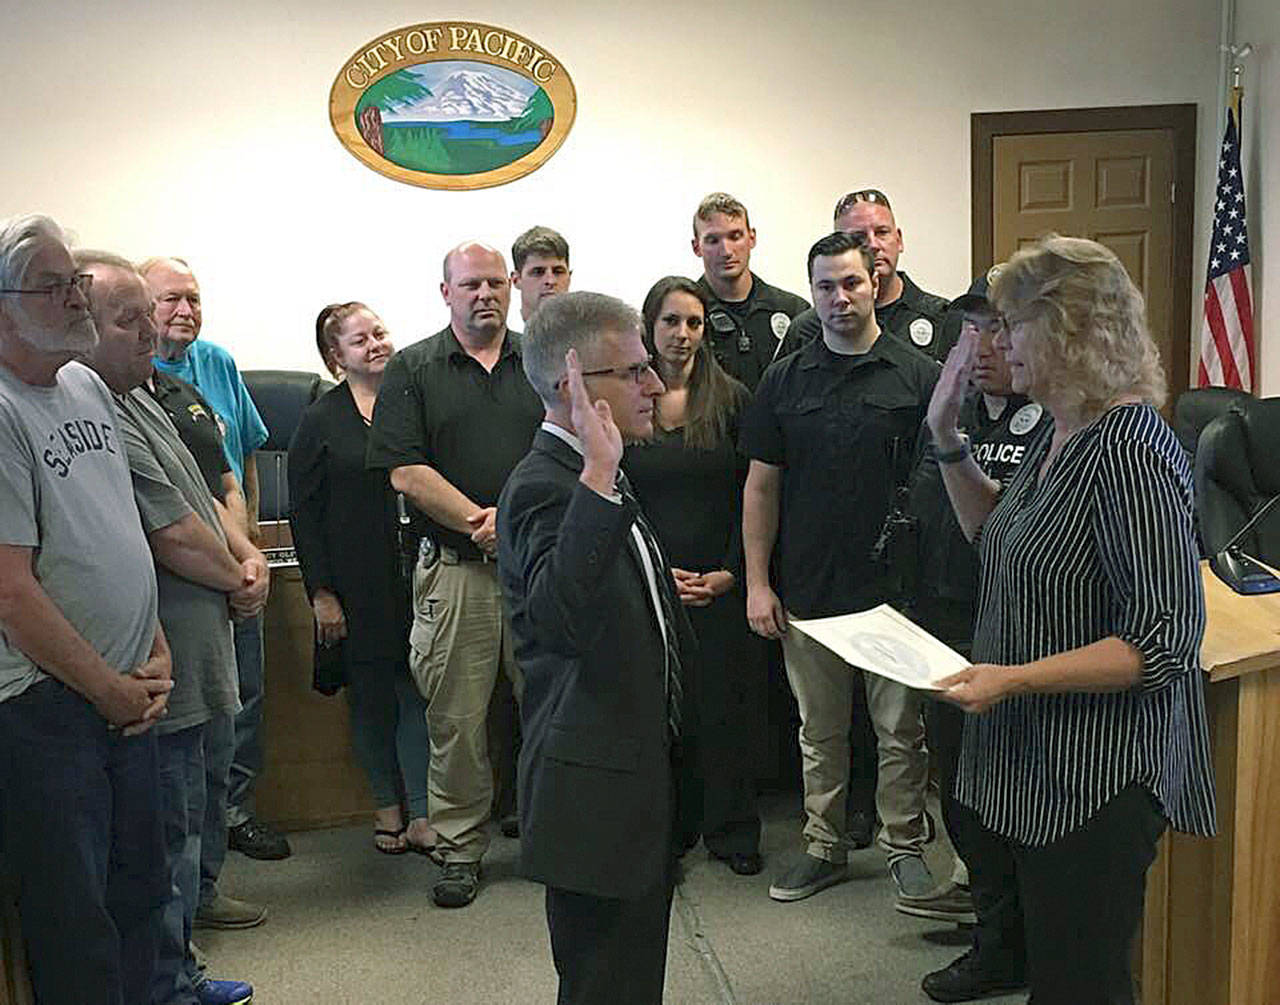 Pacific Mayor Leanne Guier swears in new police chief Stephen Craig Schwartz at the City Council meeting Monday. COURTESY PHOTO